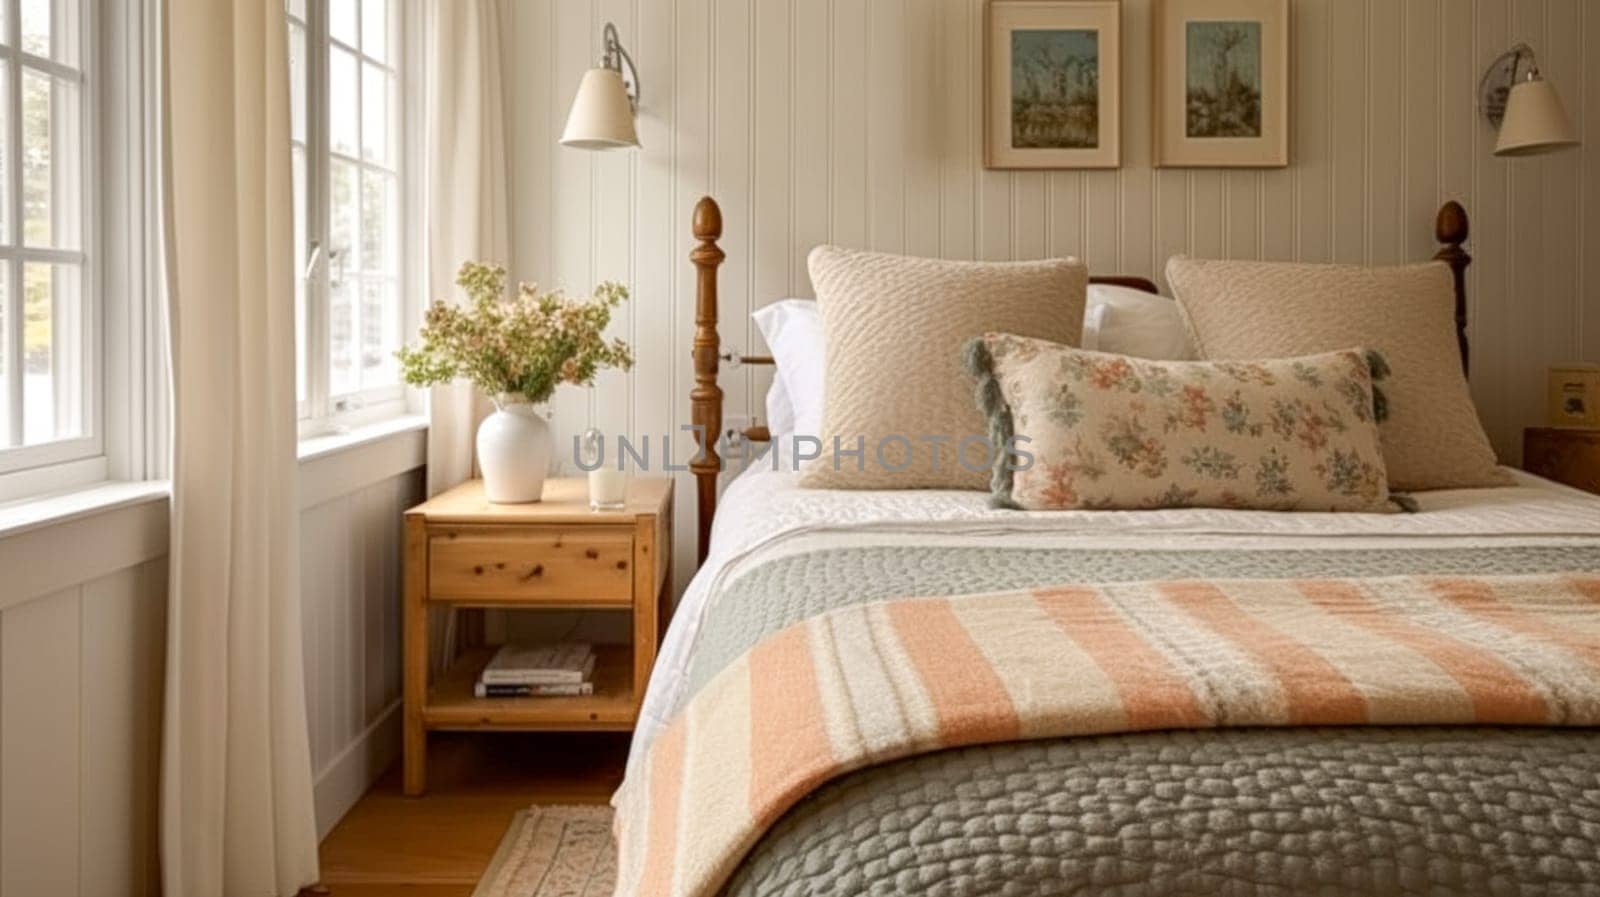 Farmhouse bedroom decor, interior design and home decor, bed with country bedding and furniture, English countryside house, holiday rental and cottage style by Anneleven